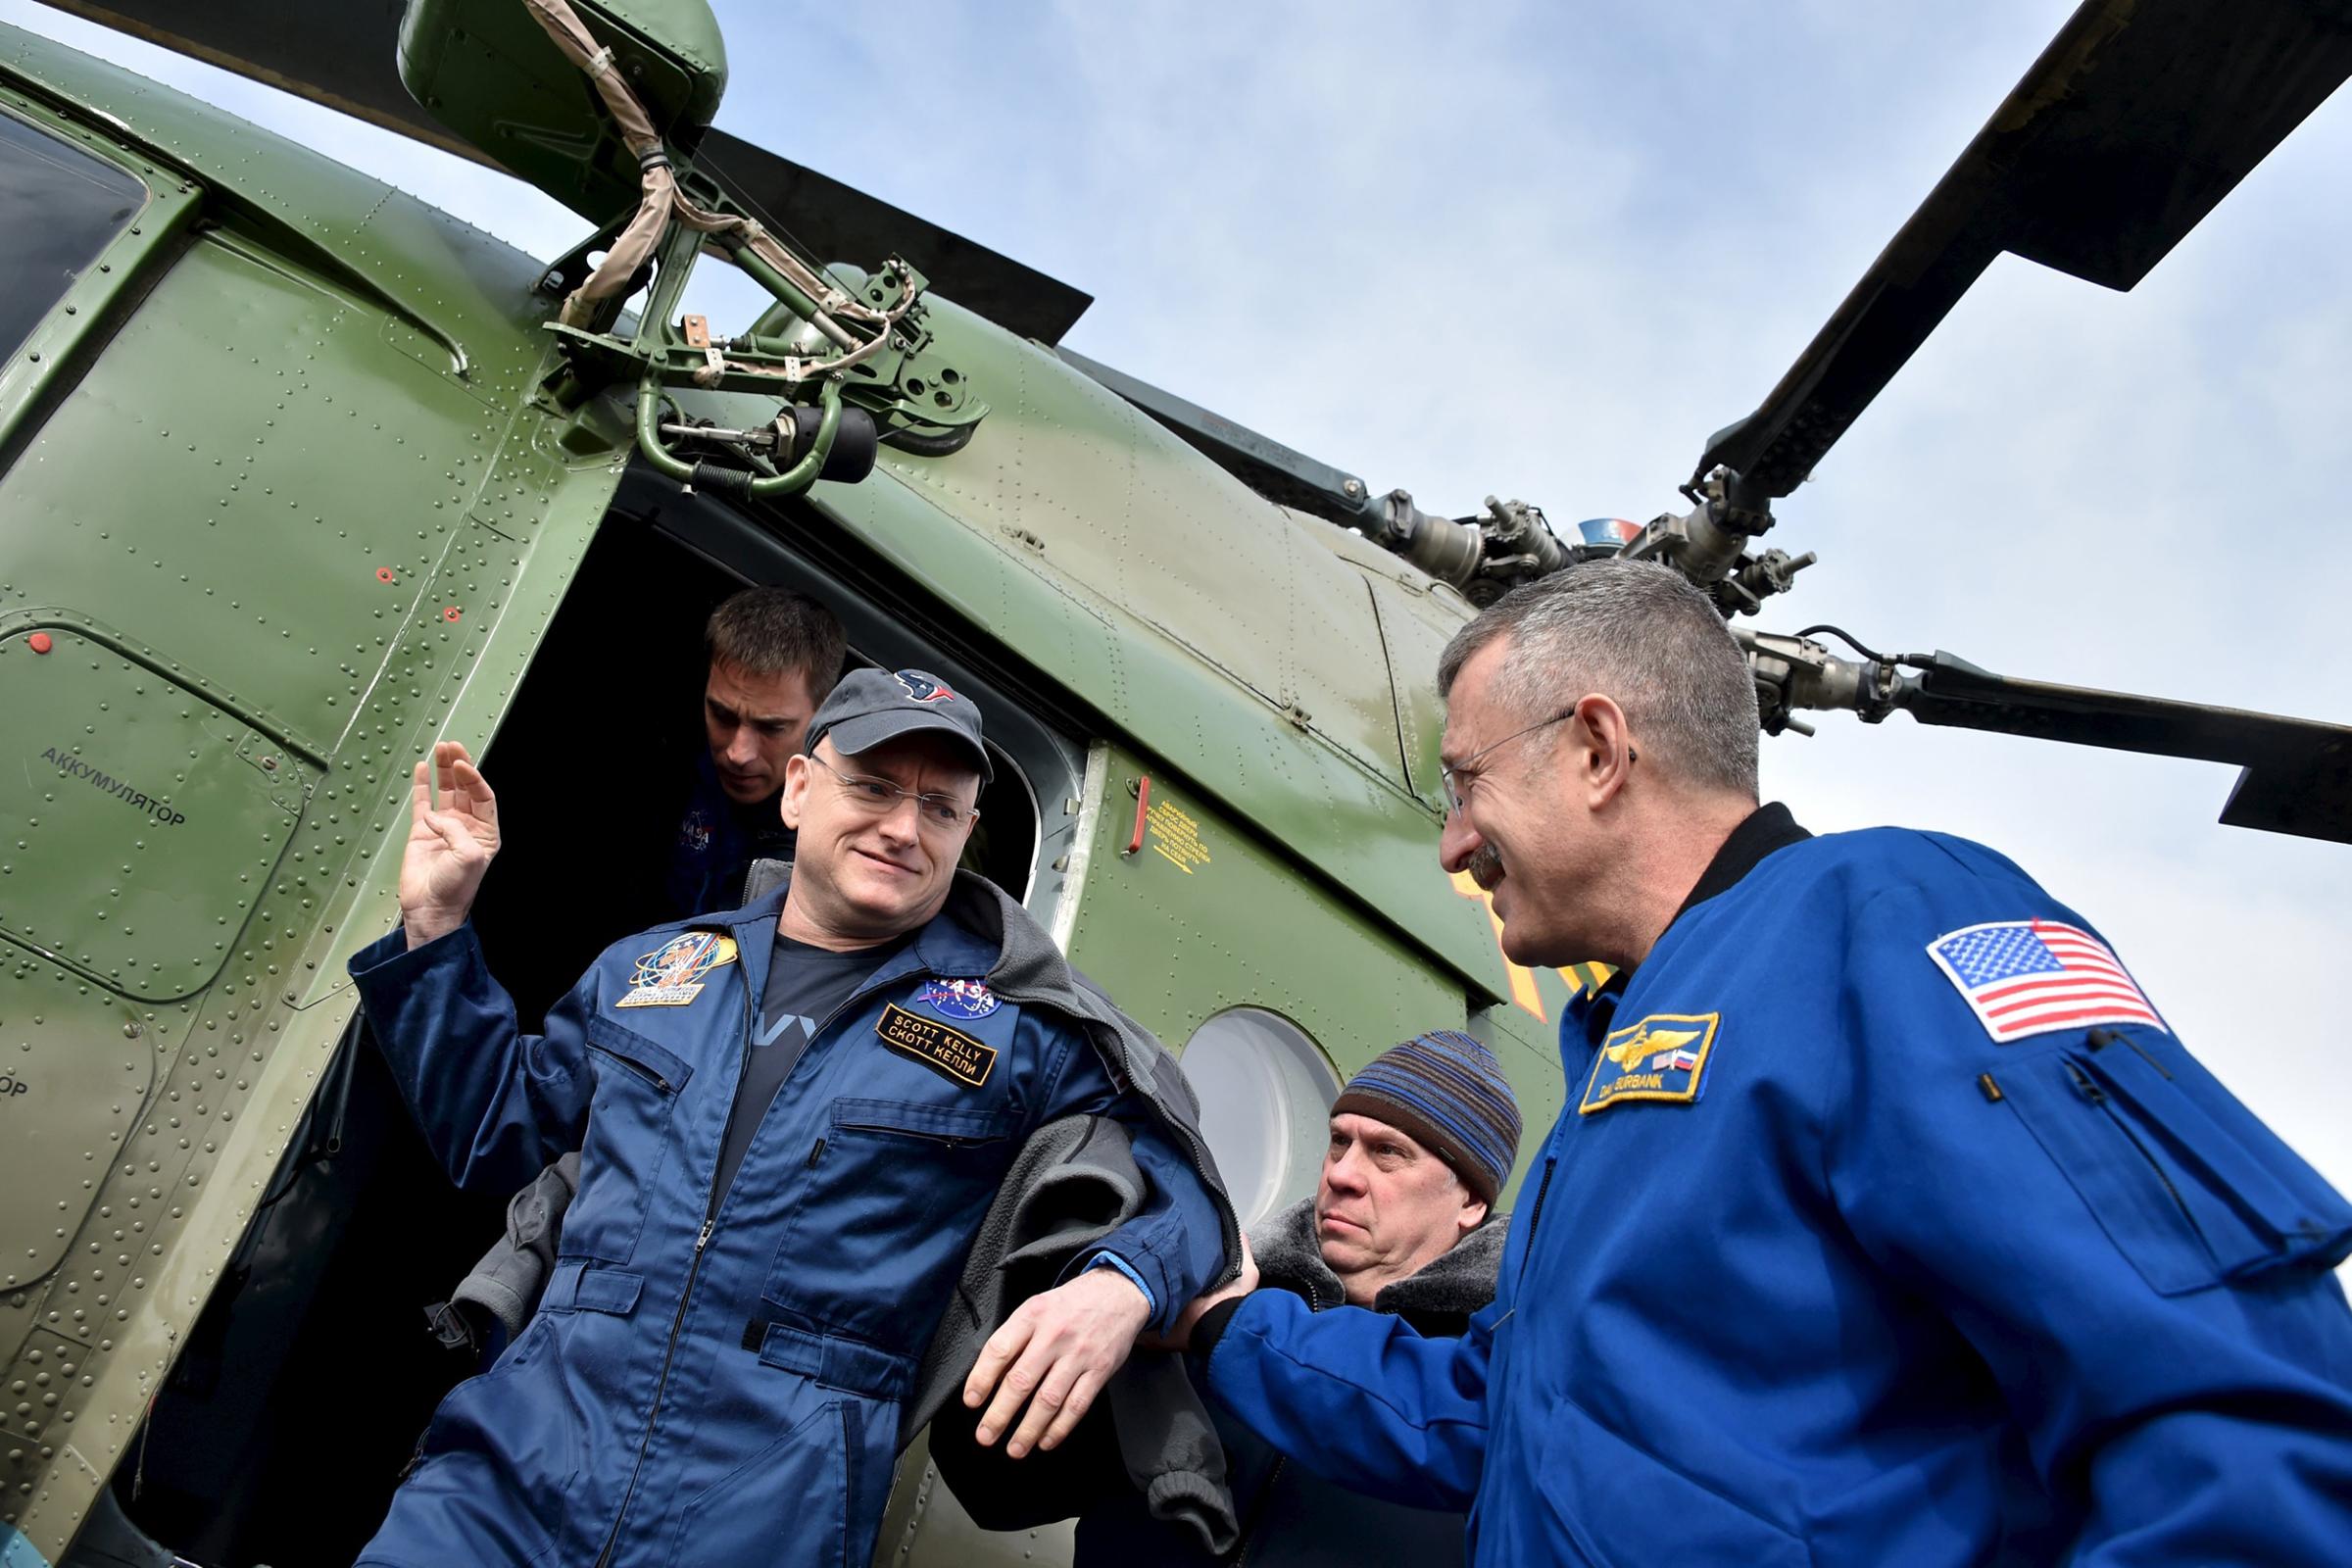 Members of NASA support team help Scott Kelly get off a helicopter at an airport in Zhezkazgan, Kazakhstan on March 2, 2016.